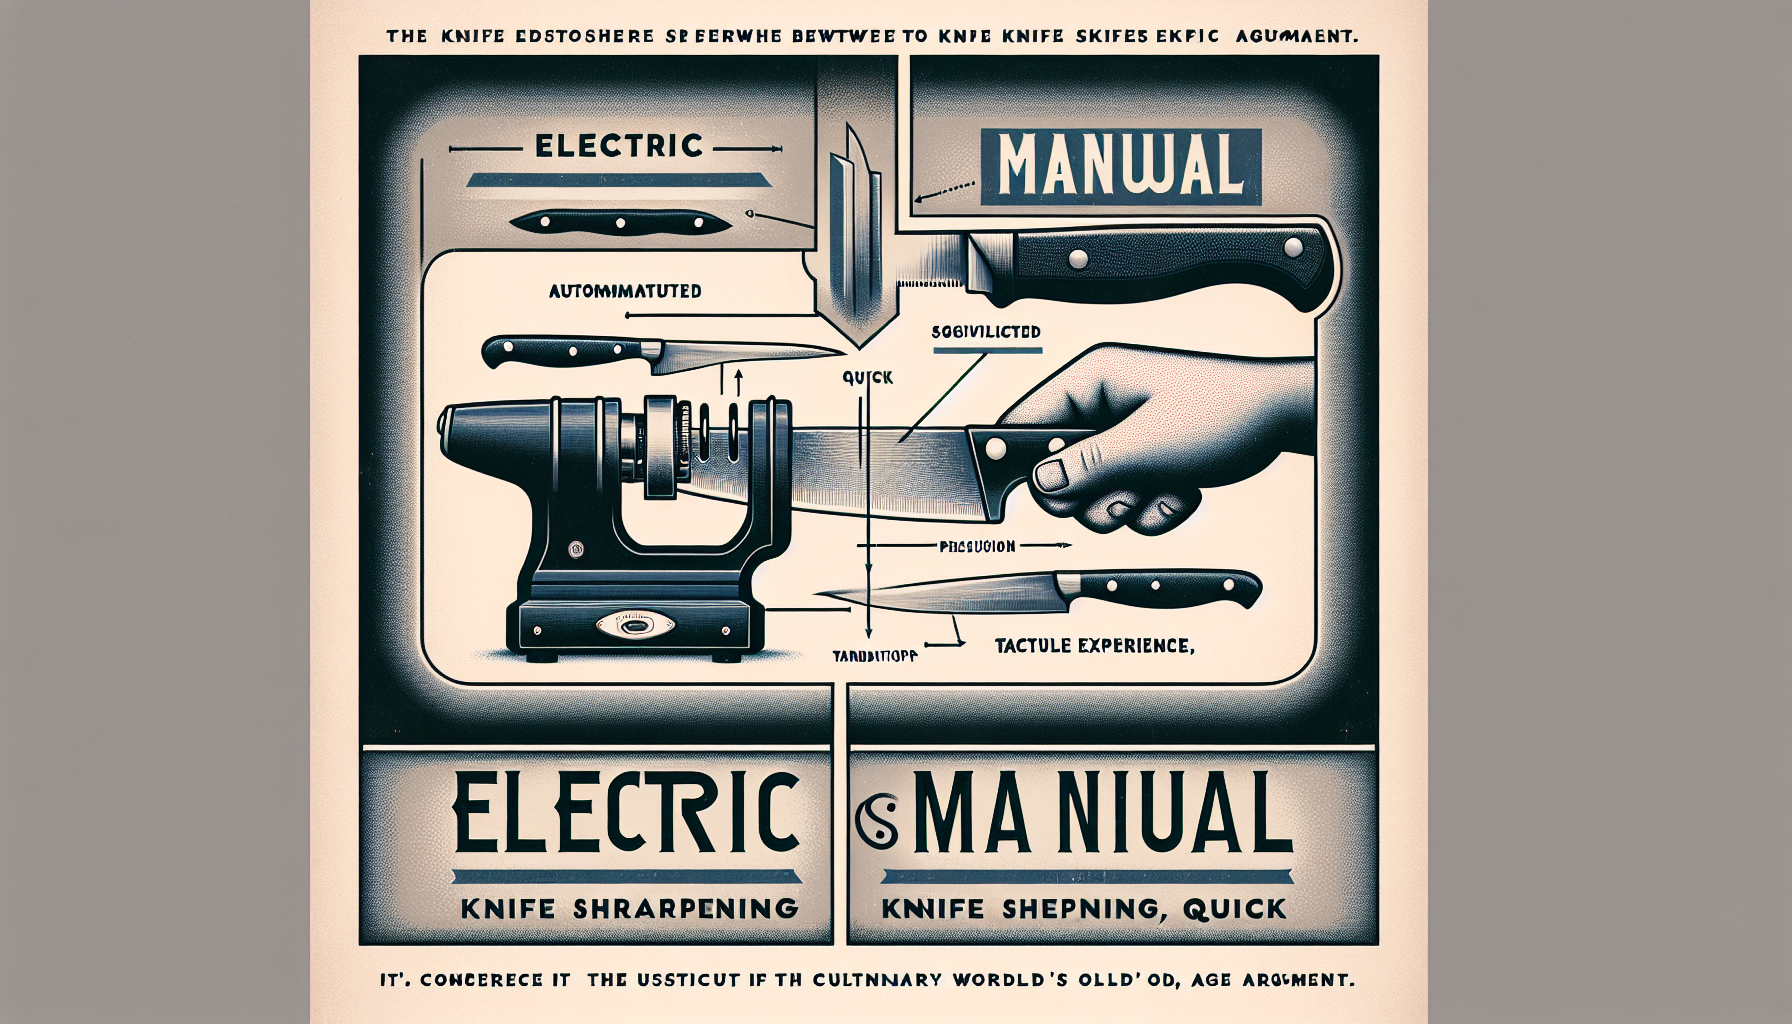 Is It Better To Sharpen Knives Electric Or Manual?